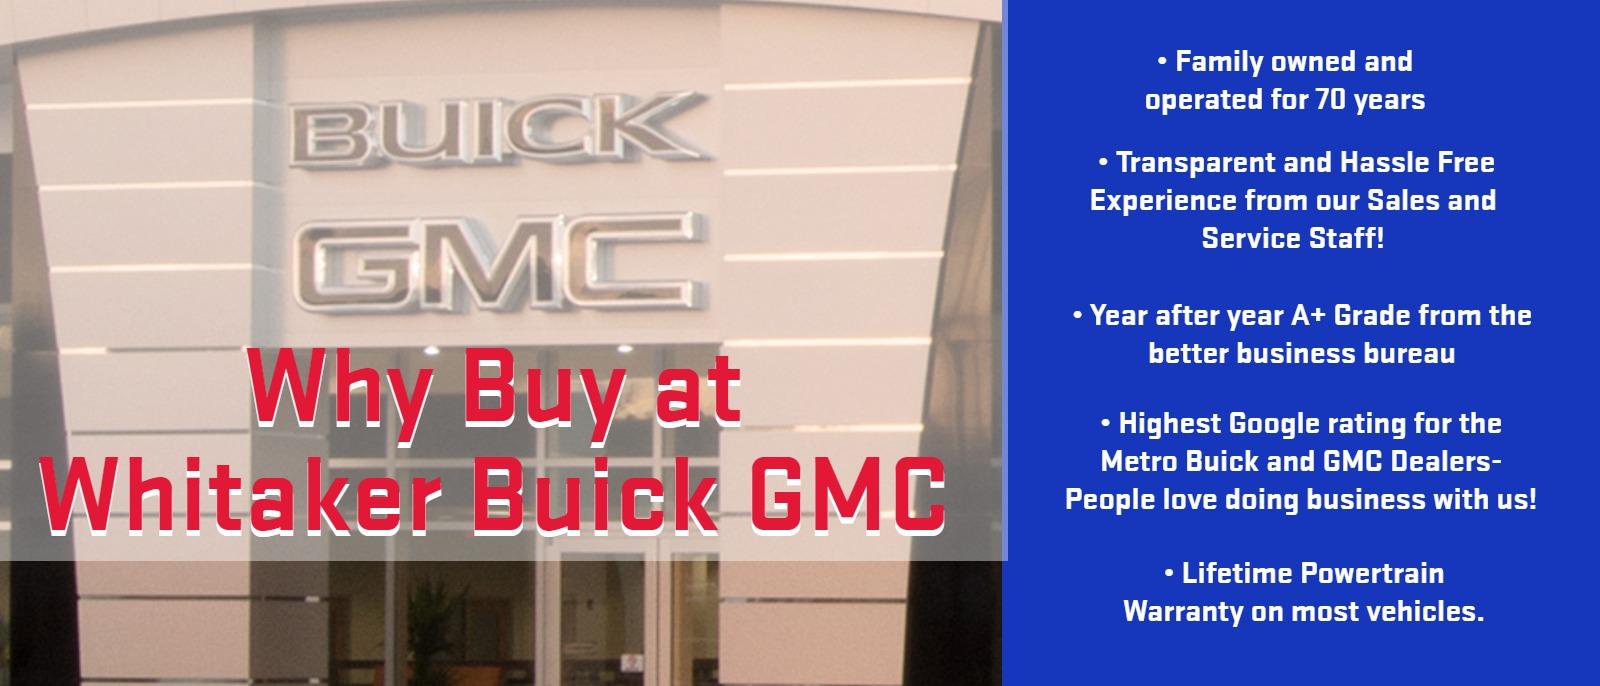 Why Buy at Whitaker Buick GMC
• Family owned and operated for 70 years
 • Transparent and Hassel Free Experience from our Sales and Service Staff!
• Year after year A+ Grade from the better business bureau
• Highest Google rating for the Metro Buick and GMC Dealers- People love doing business with us!
• Lifetime Powertrain Warranty on most vehicles.